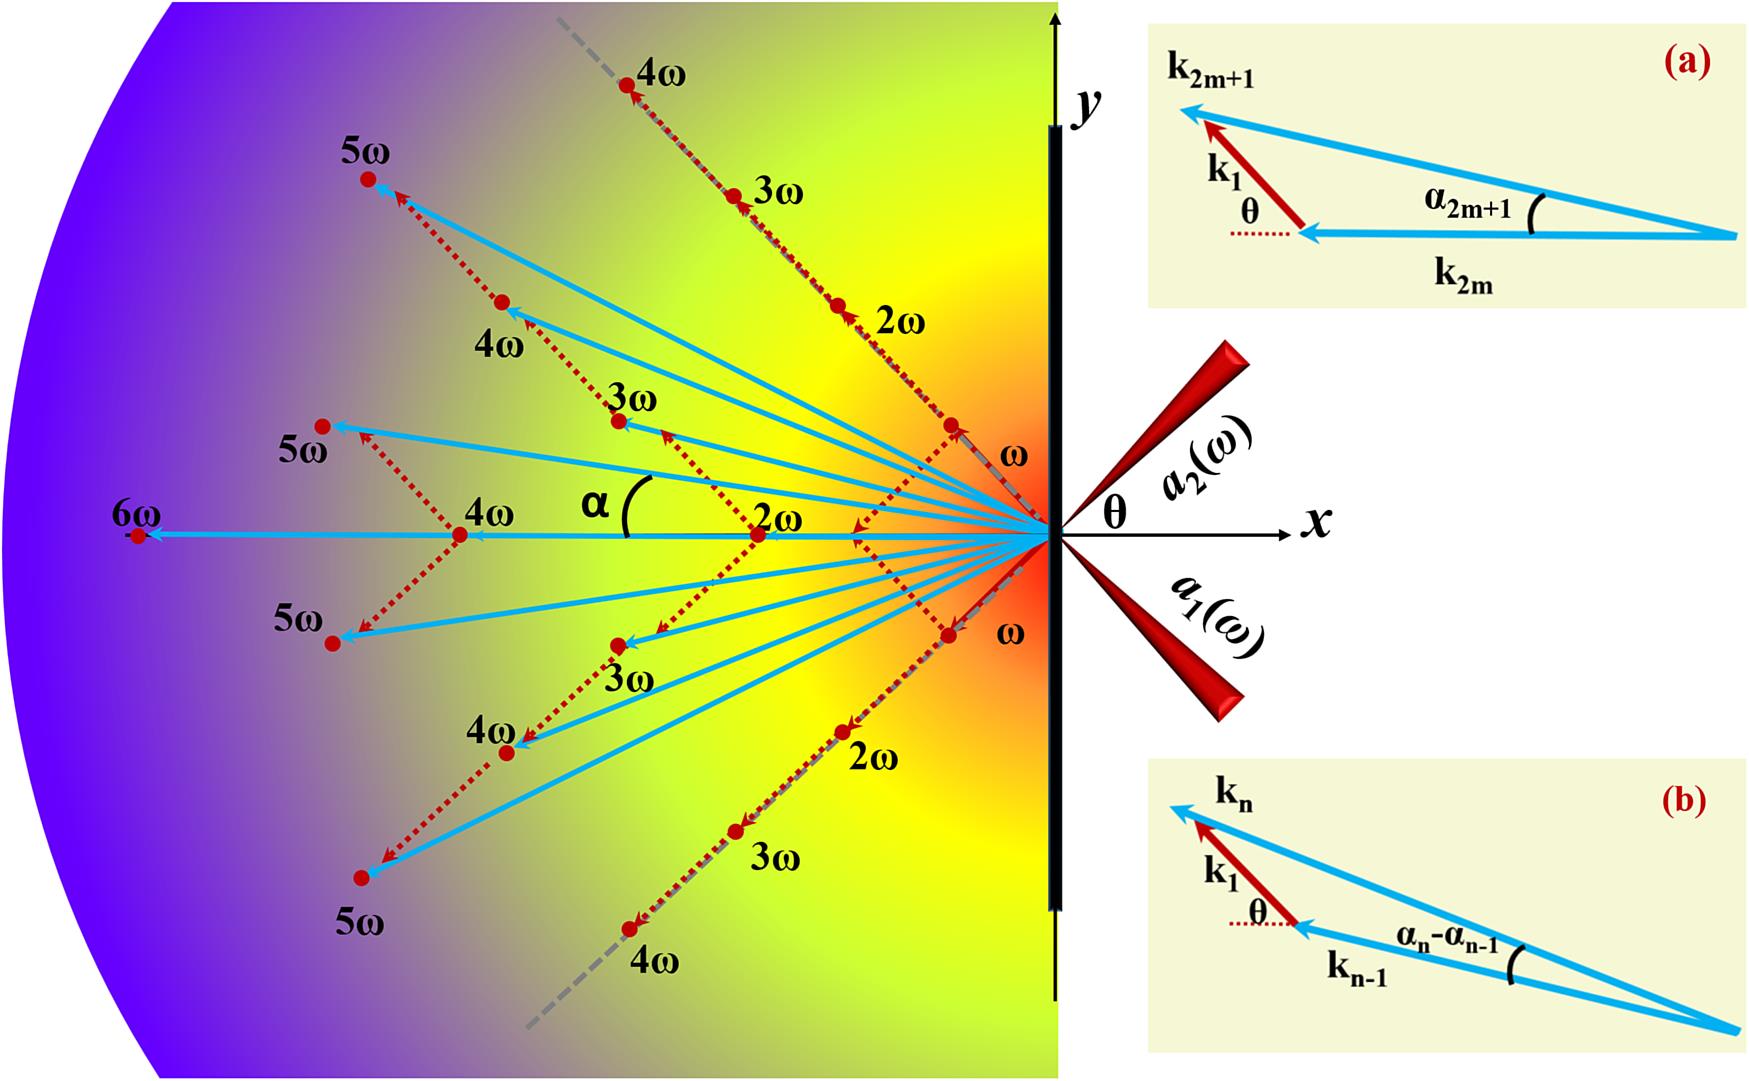 Schematic of the chain selection rule for the proposed approach. Two laser pulses a1(ω) and a2(ω), irradiate a thin foil symmetrically at a large crossing angle 2θ, considering the normal direction of the target surface. High-order harmonics are emitted at different spatial locations at an angle α, which is determined by the conservation of energy and linear momentum through the chain selection rule. This chain selection rule is demonstrated by the phase-matching schemes (a) and (b).